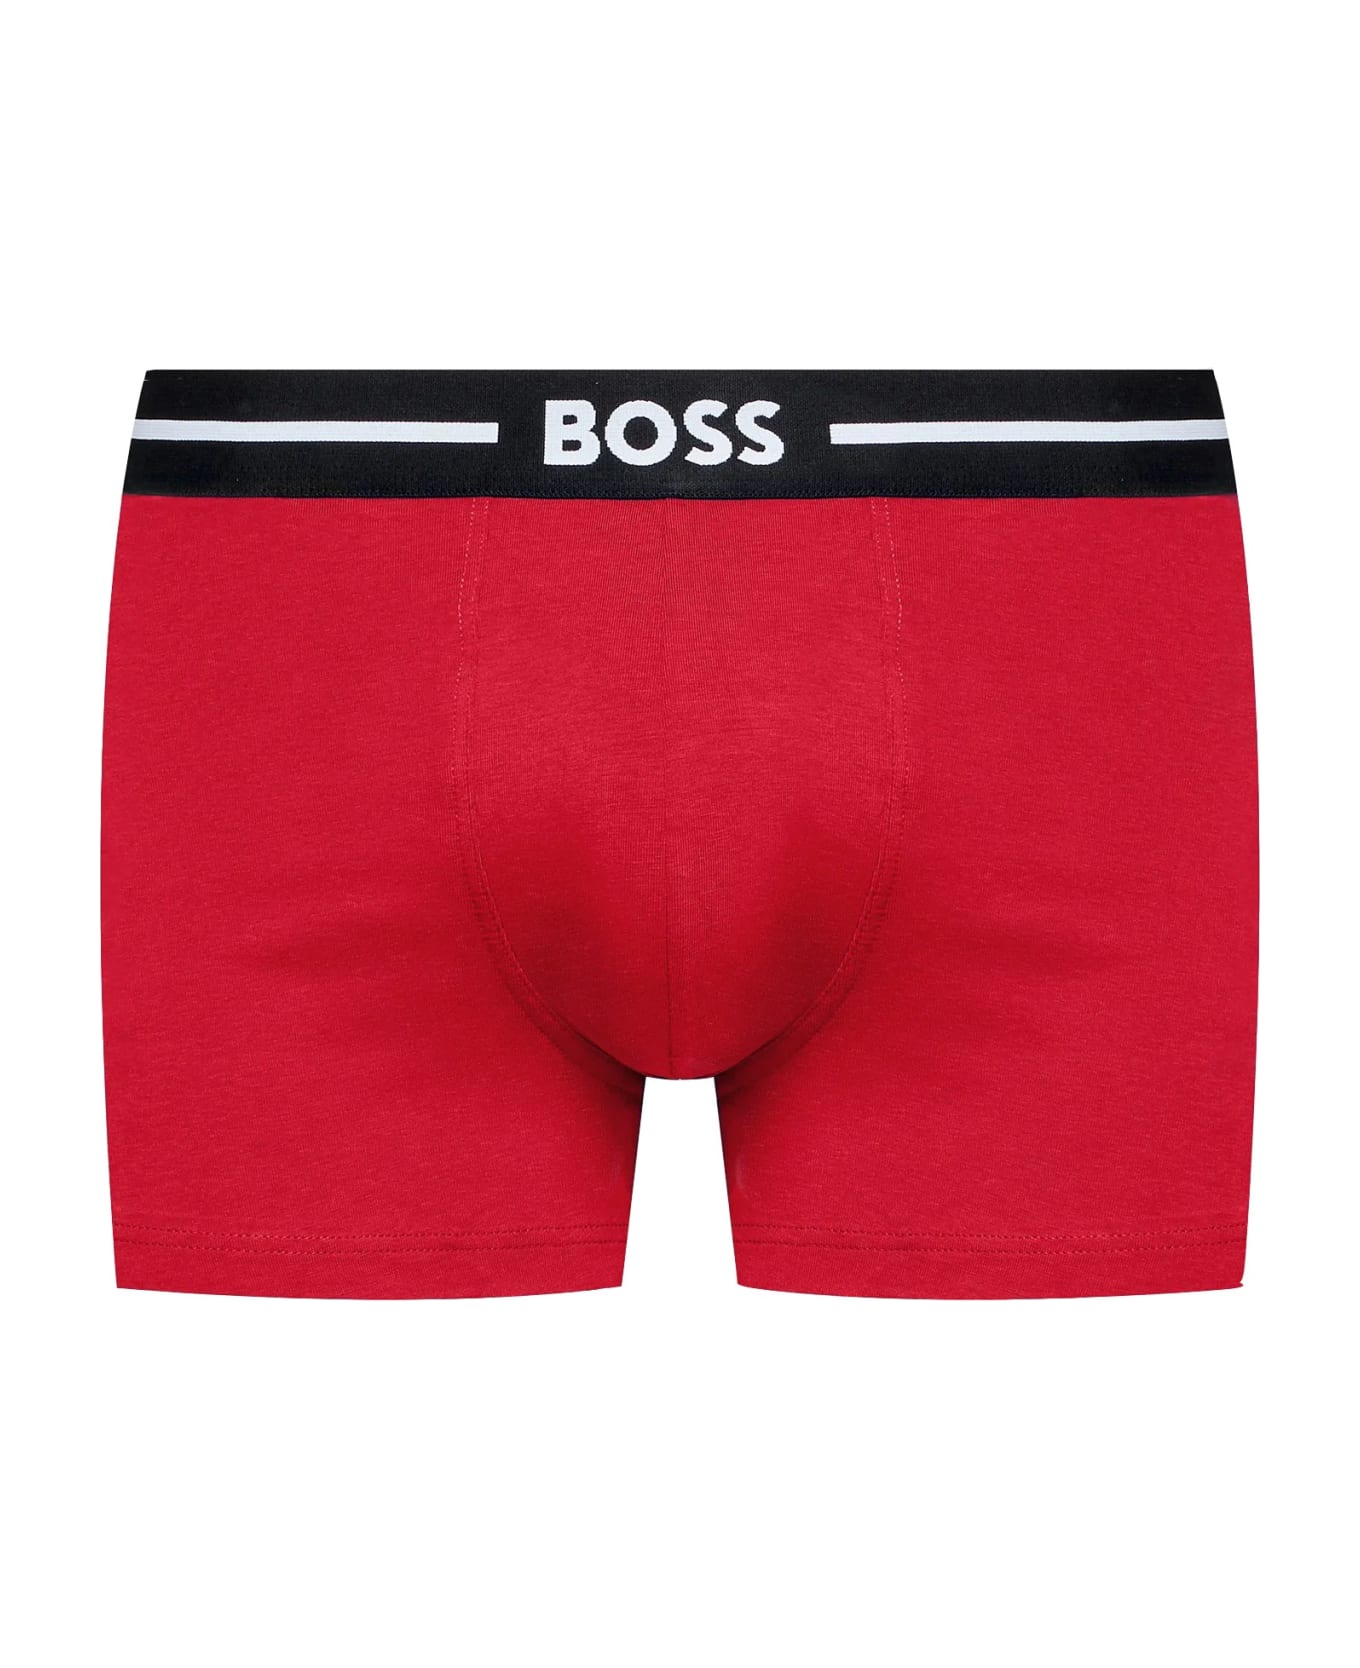 Hugo Boss Pack Of Three Boxers - MULTICOLOR